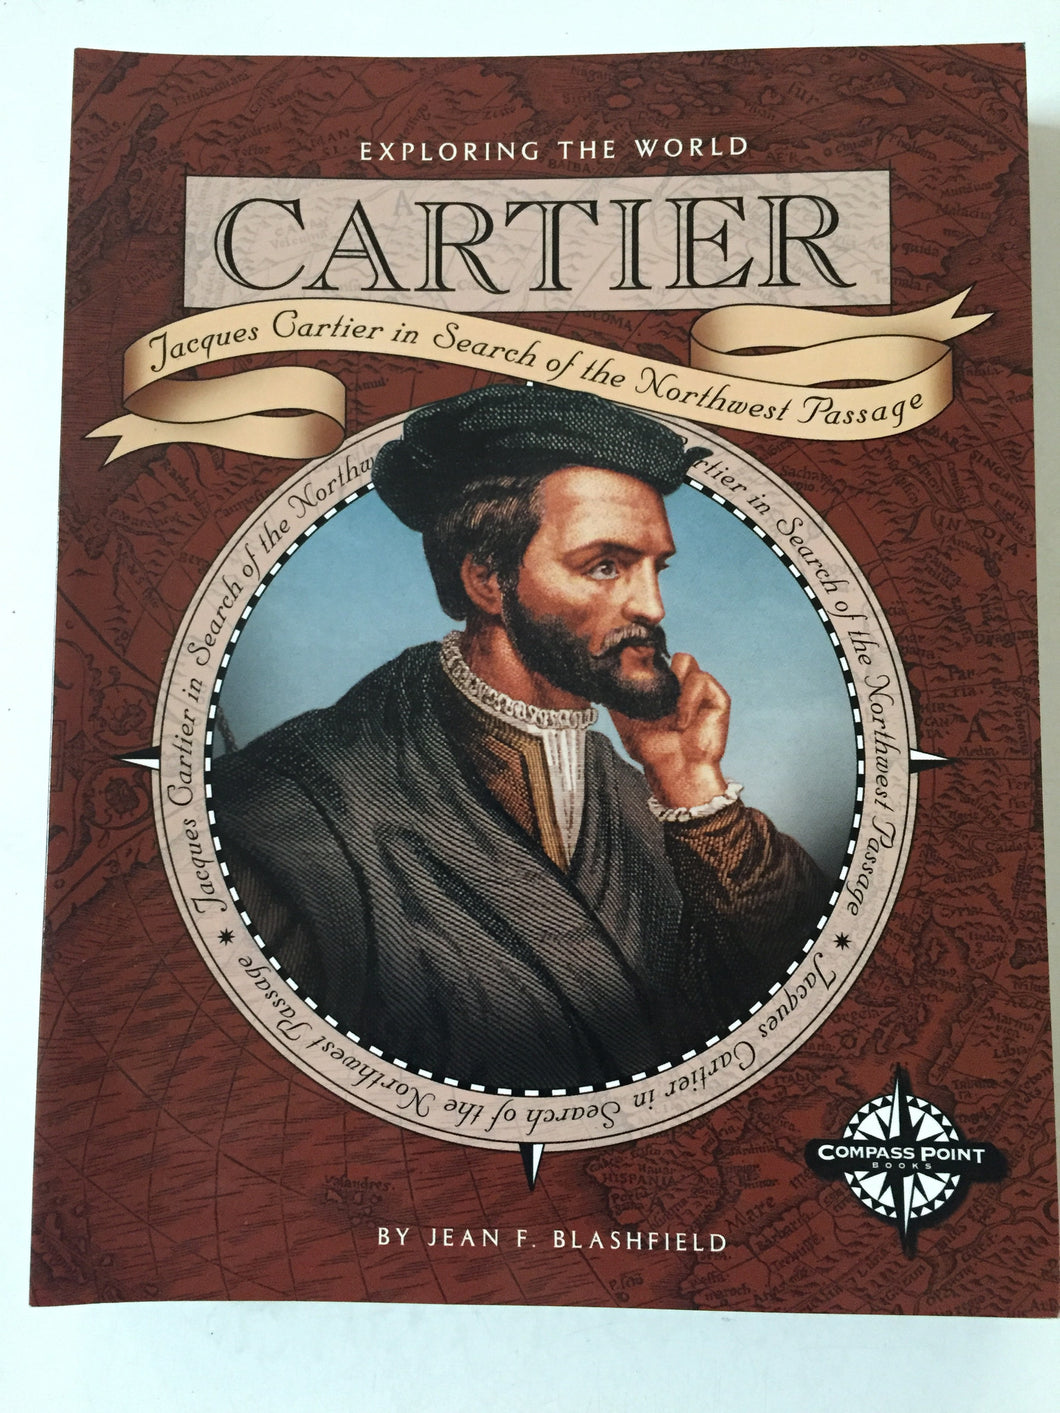 Cartier Jacques Cartier in Search of the Northwest Passage - Slick Cat Books